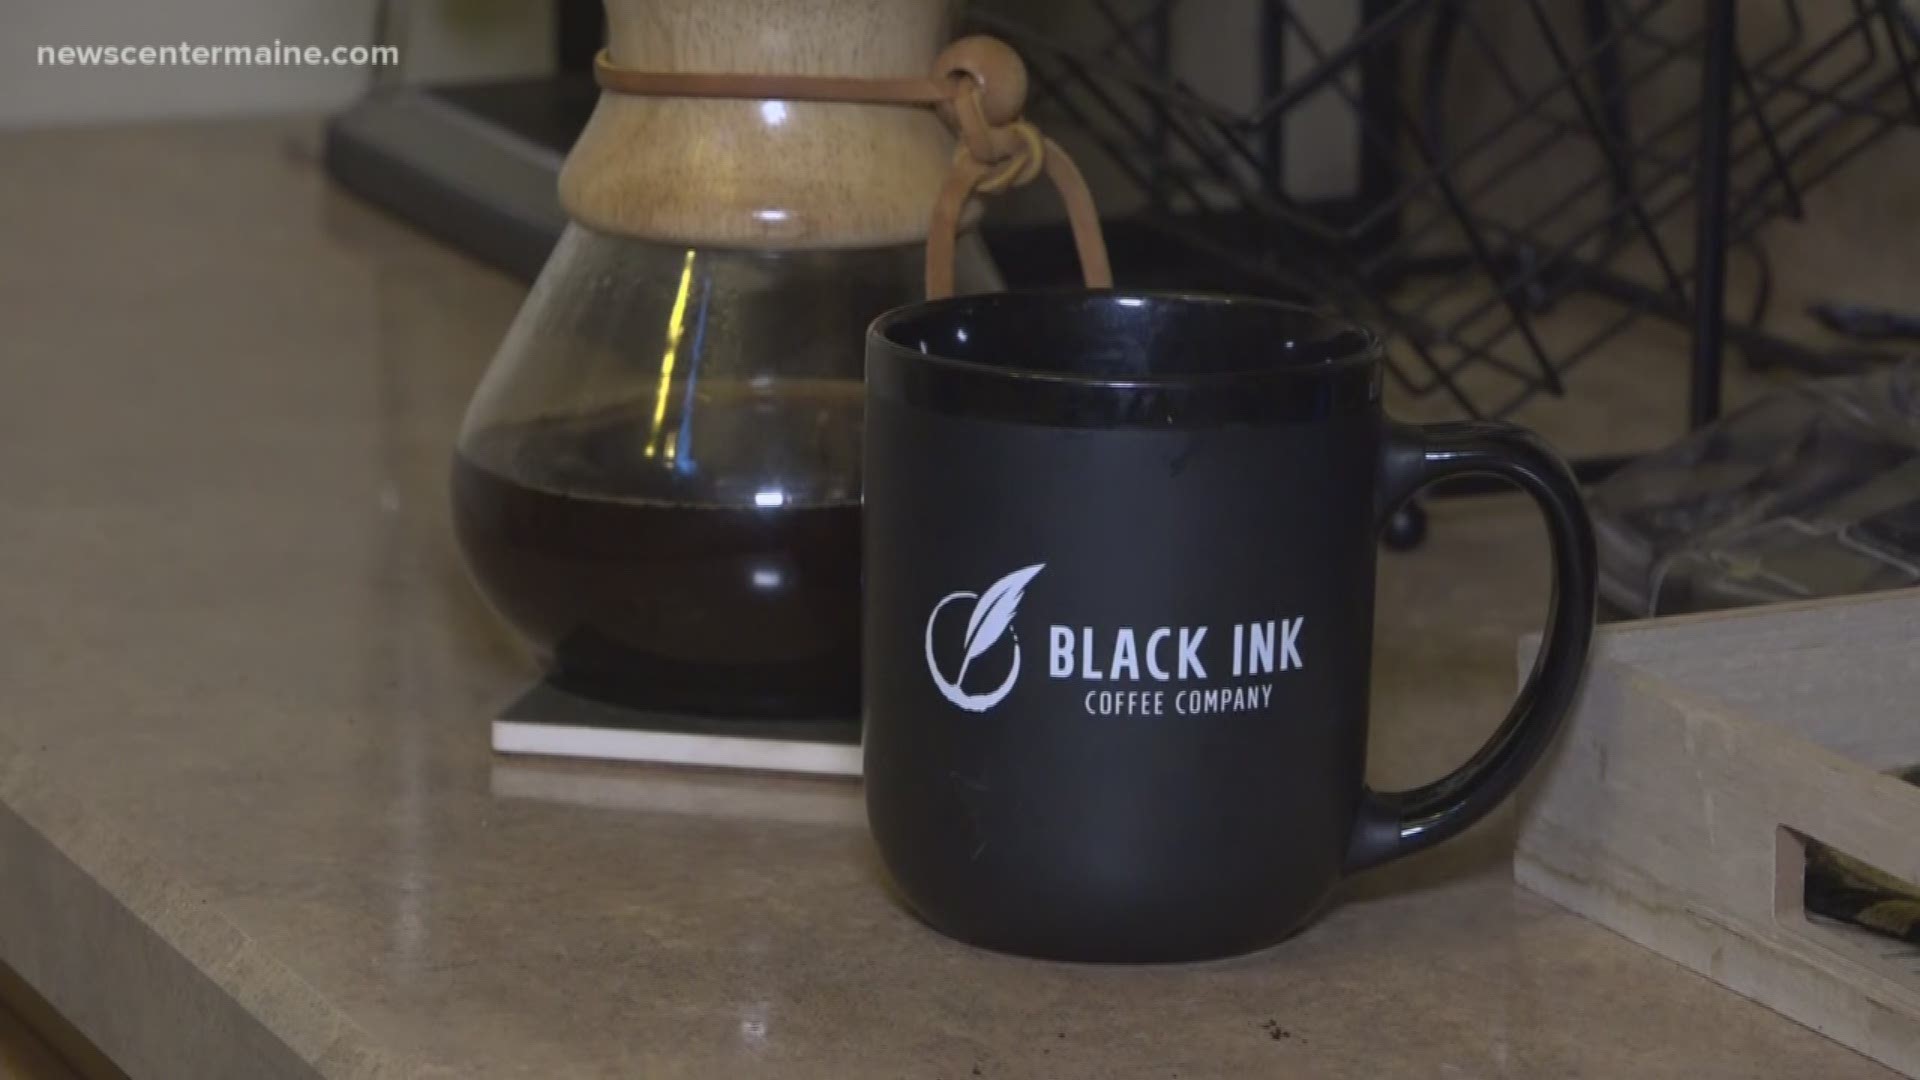 A Maine member of the military wants to use coffee to boost the spirits of troops serving overseas.